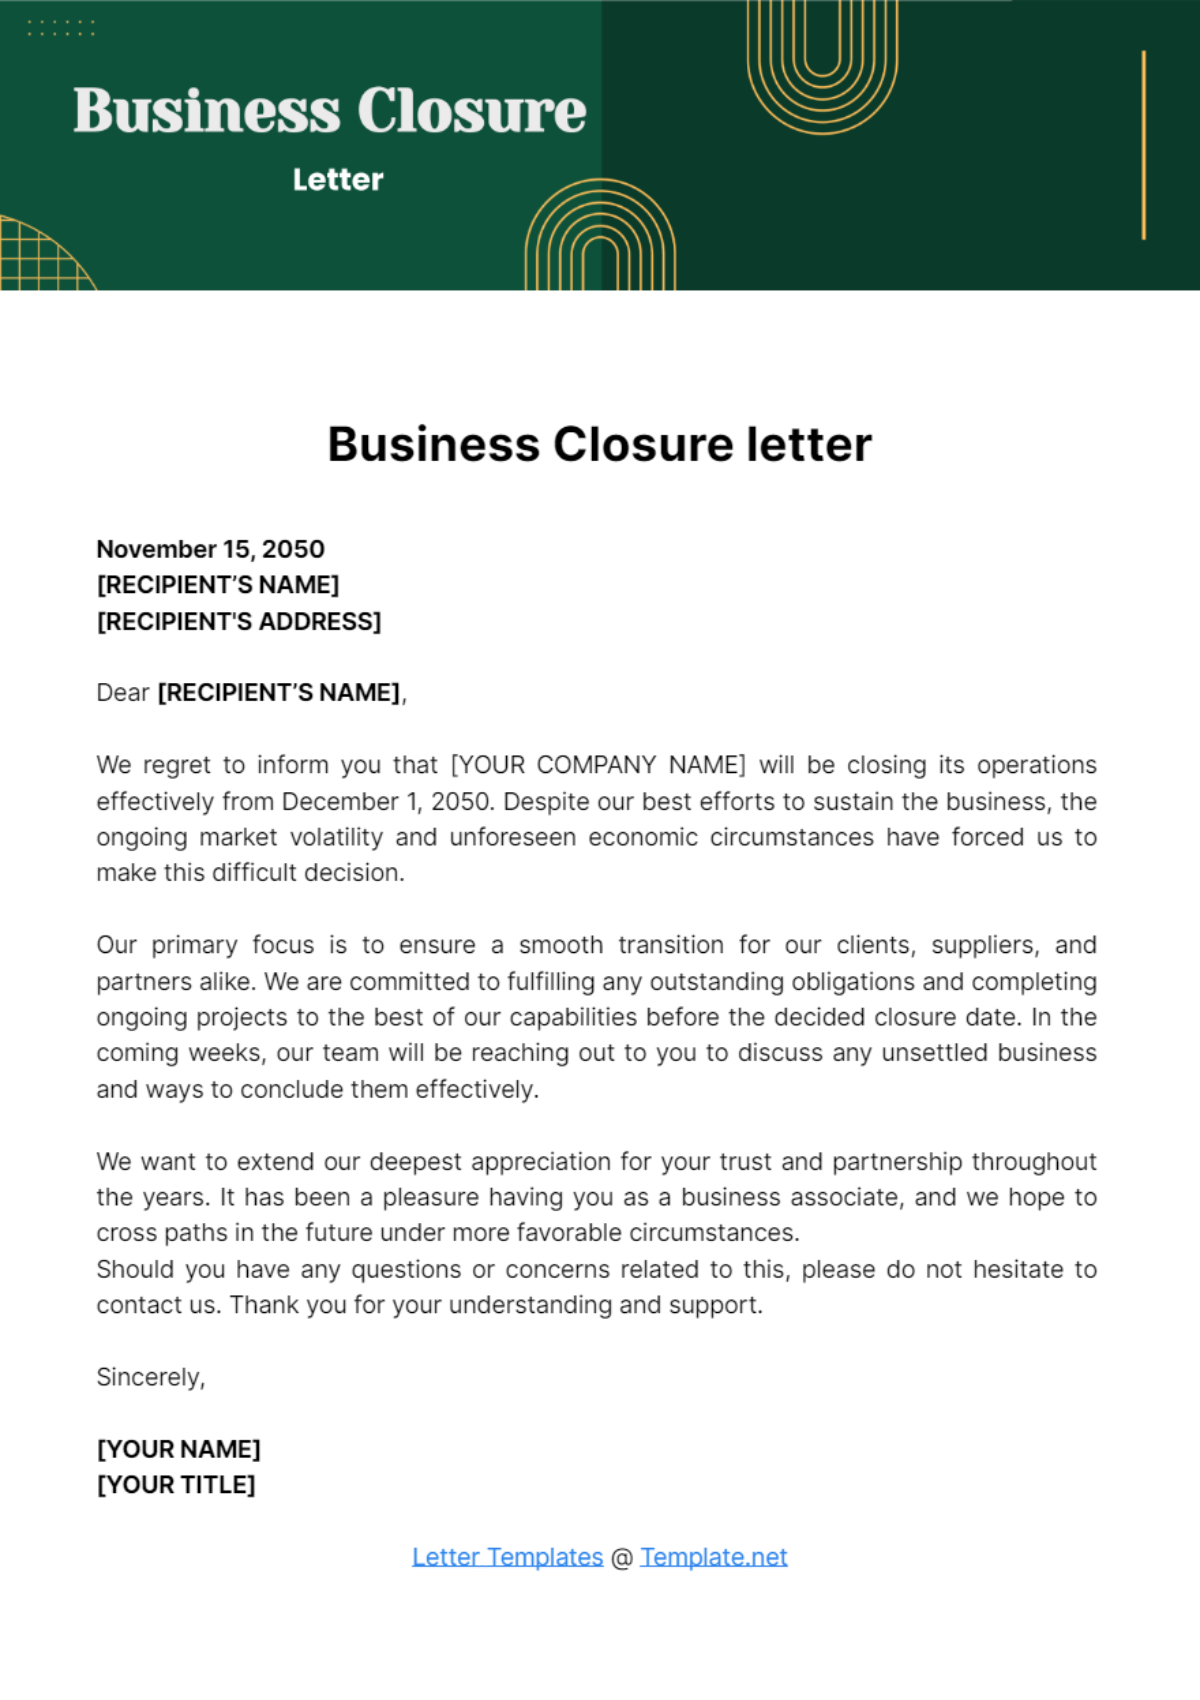 Business Closure Letter Template